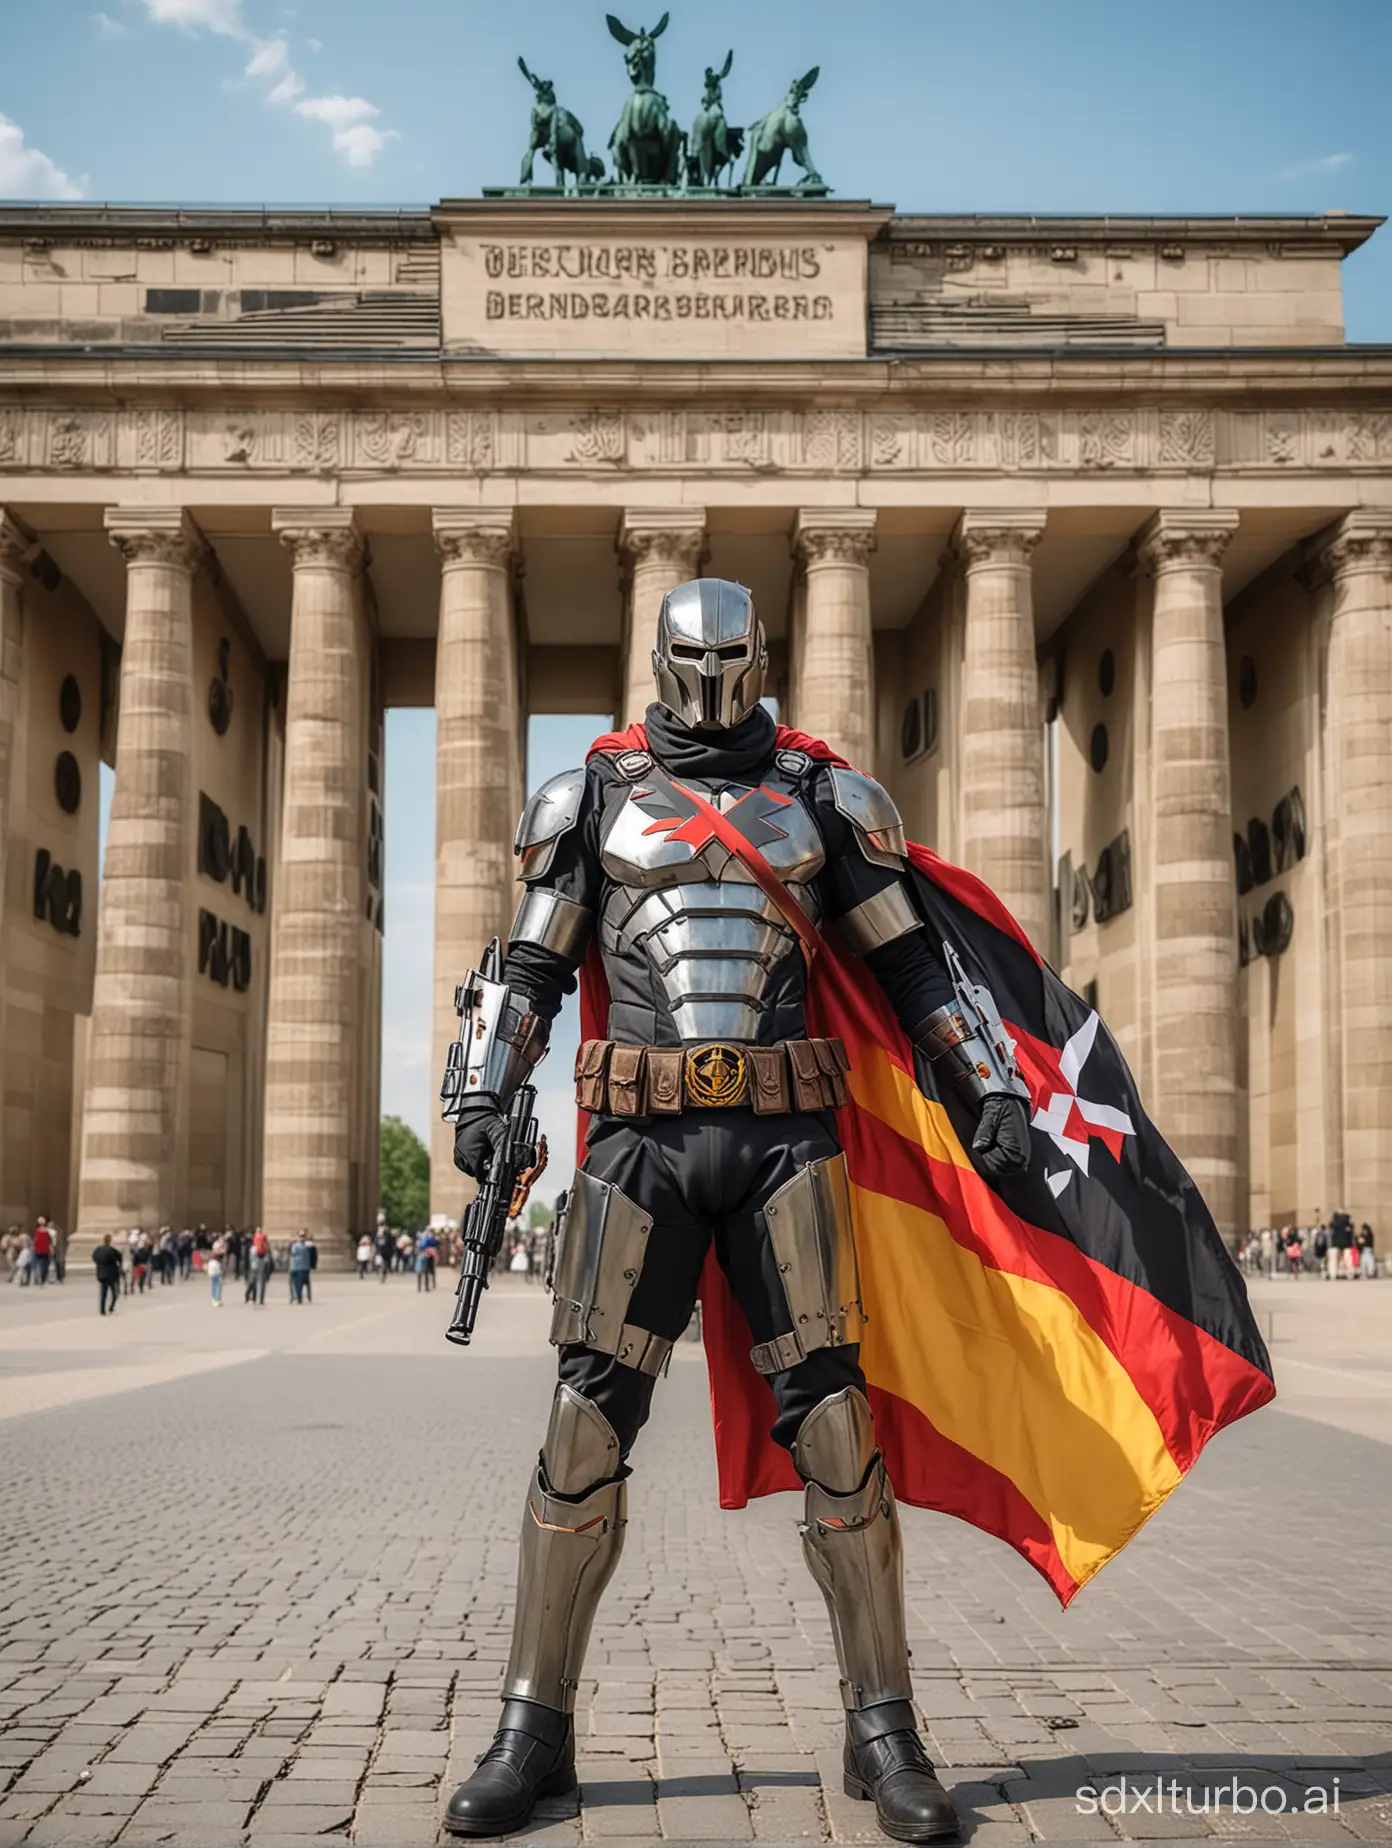 create a german superhero with armoured costume in german colours and he’s holding a weapon. The superhero should be wearing cape made up of german flag. and he’s standing near Brandenburg Gate